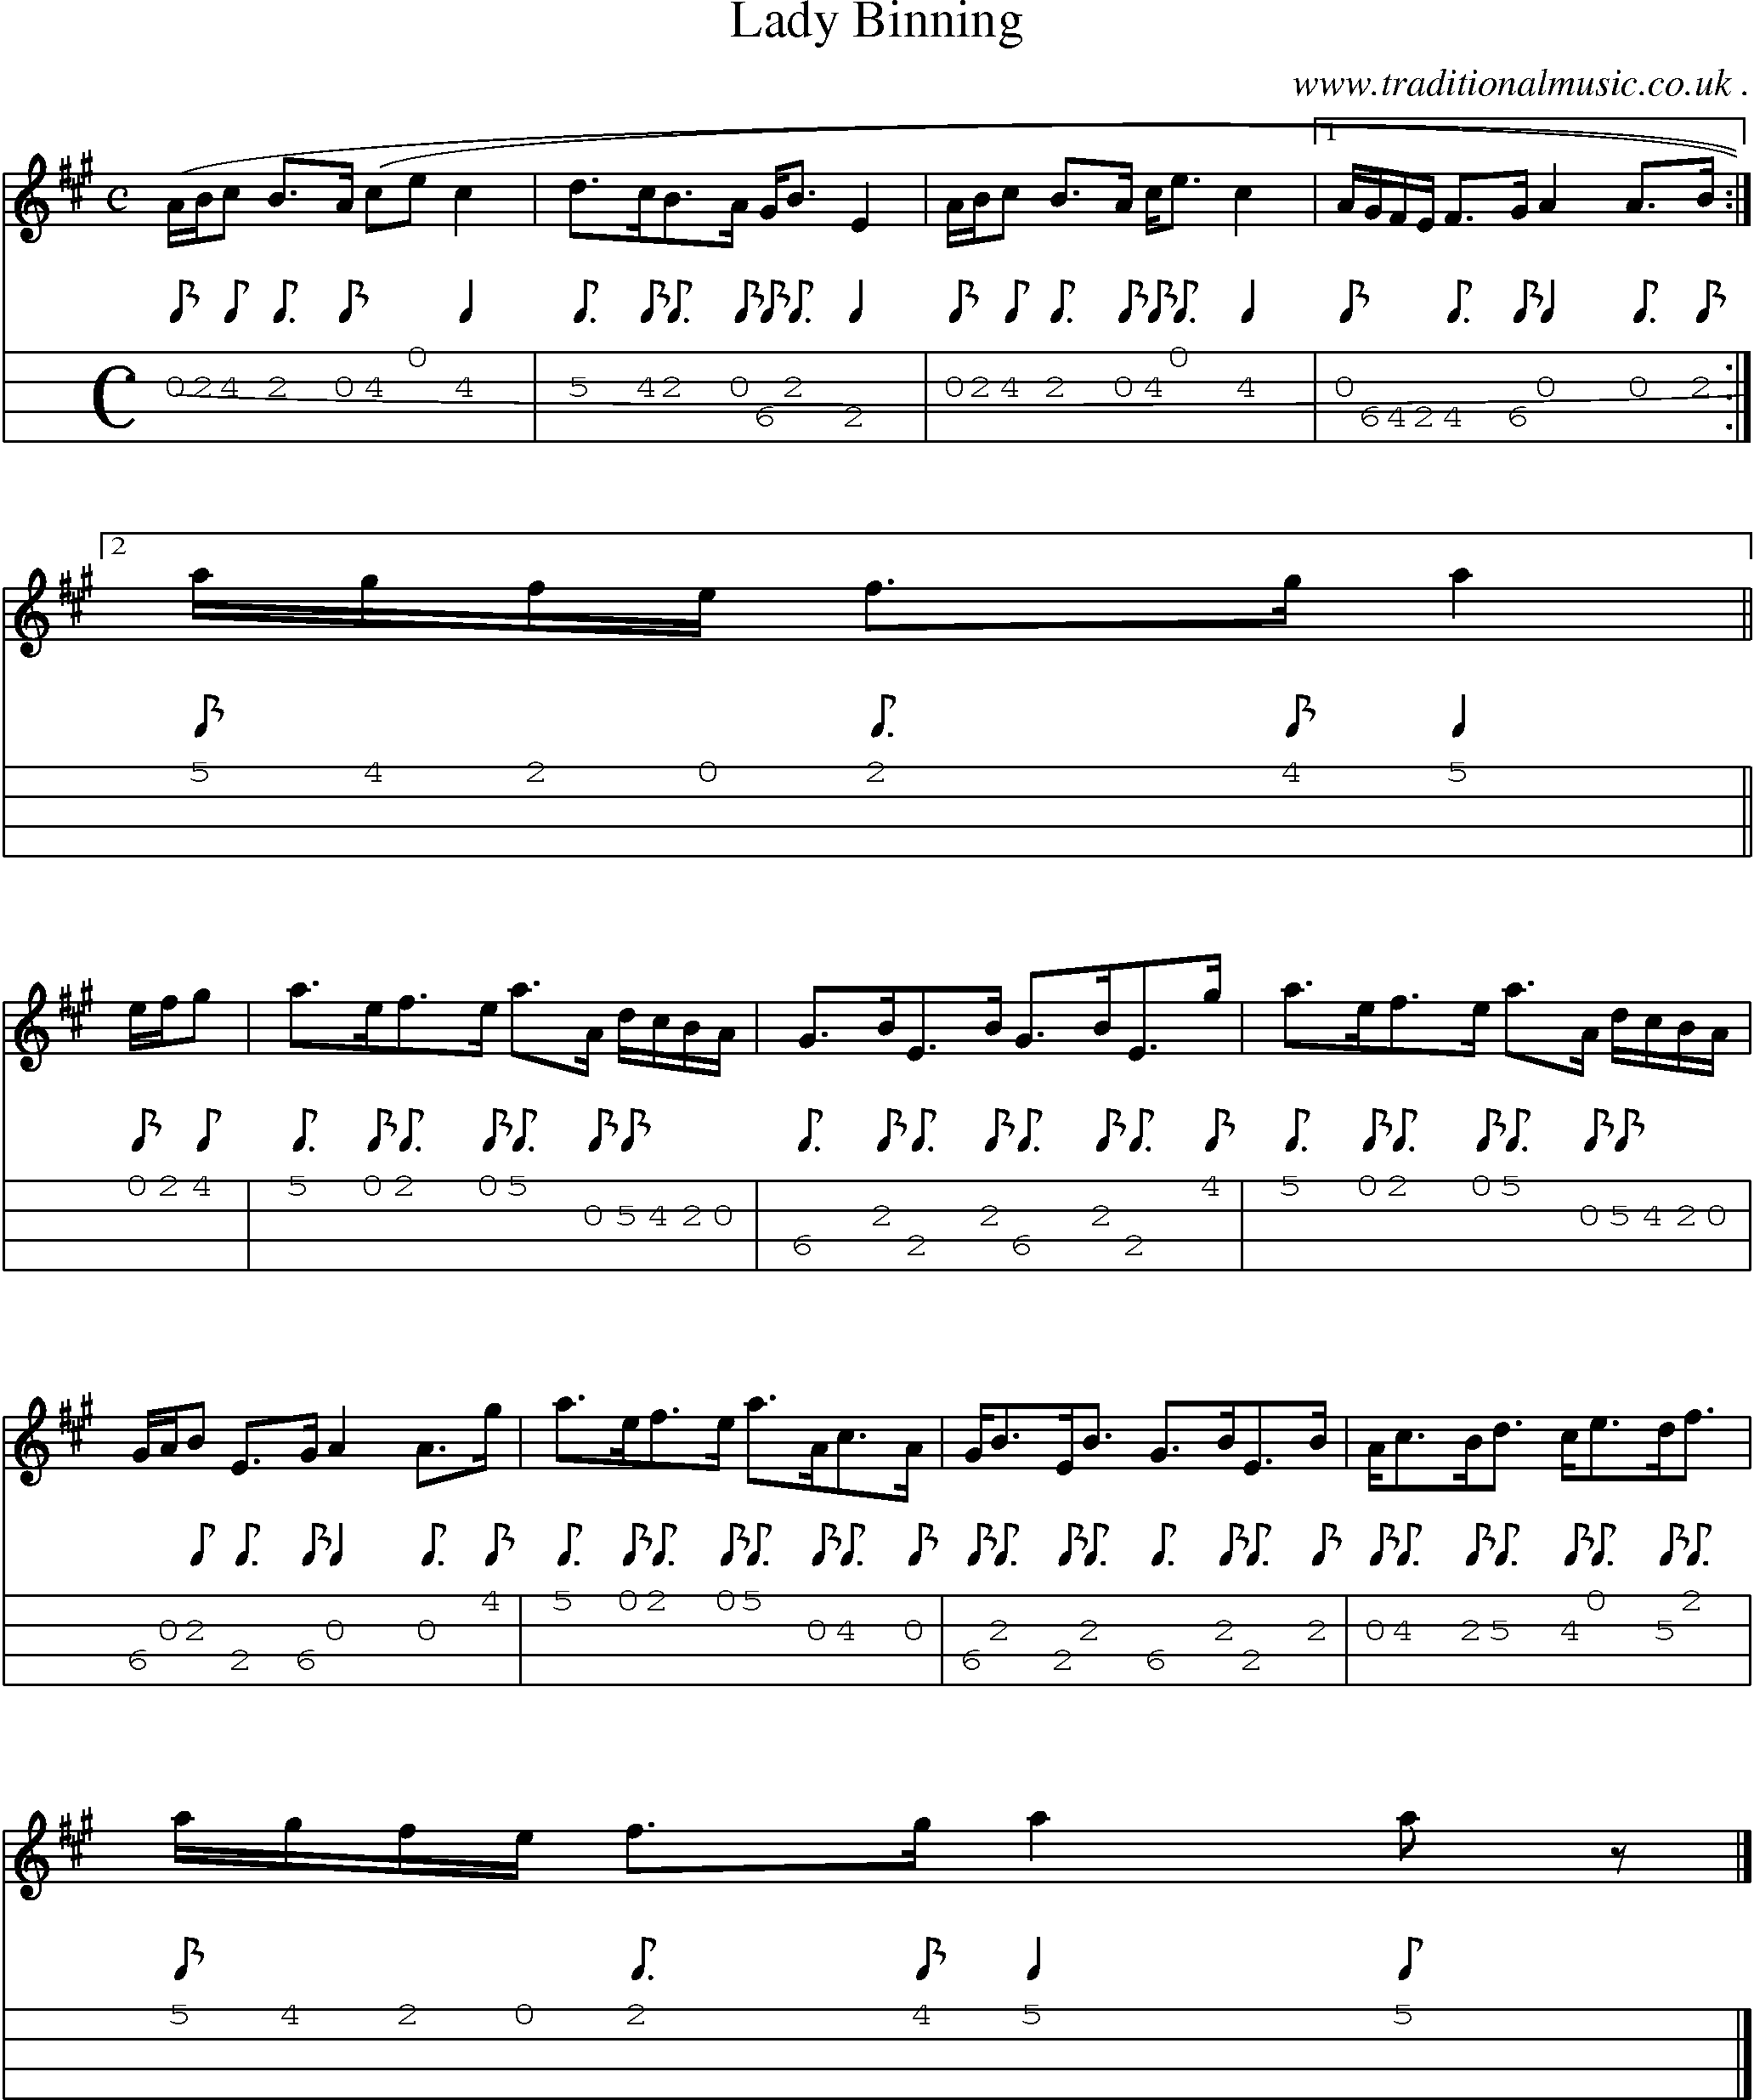 Sheet-music  score, Chords and Mandolin Tabs for Lady Binning